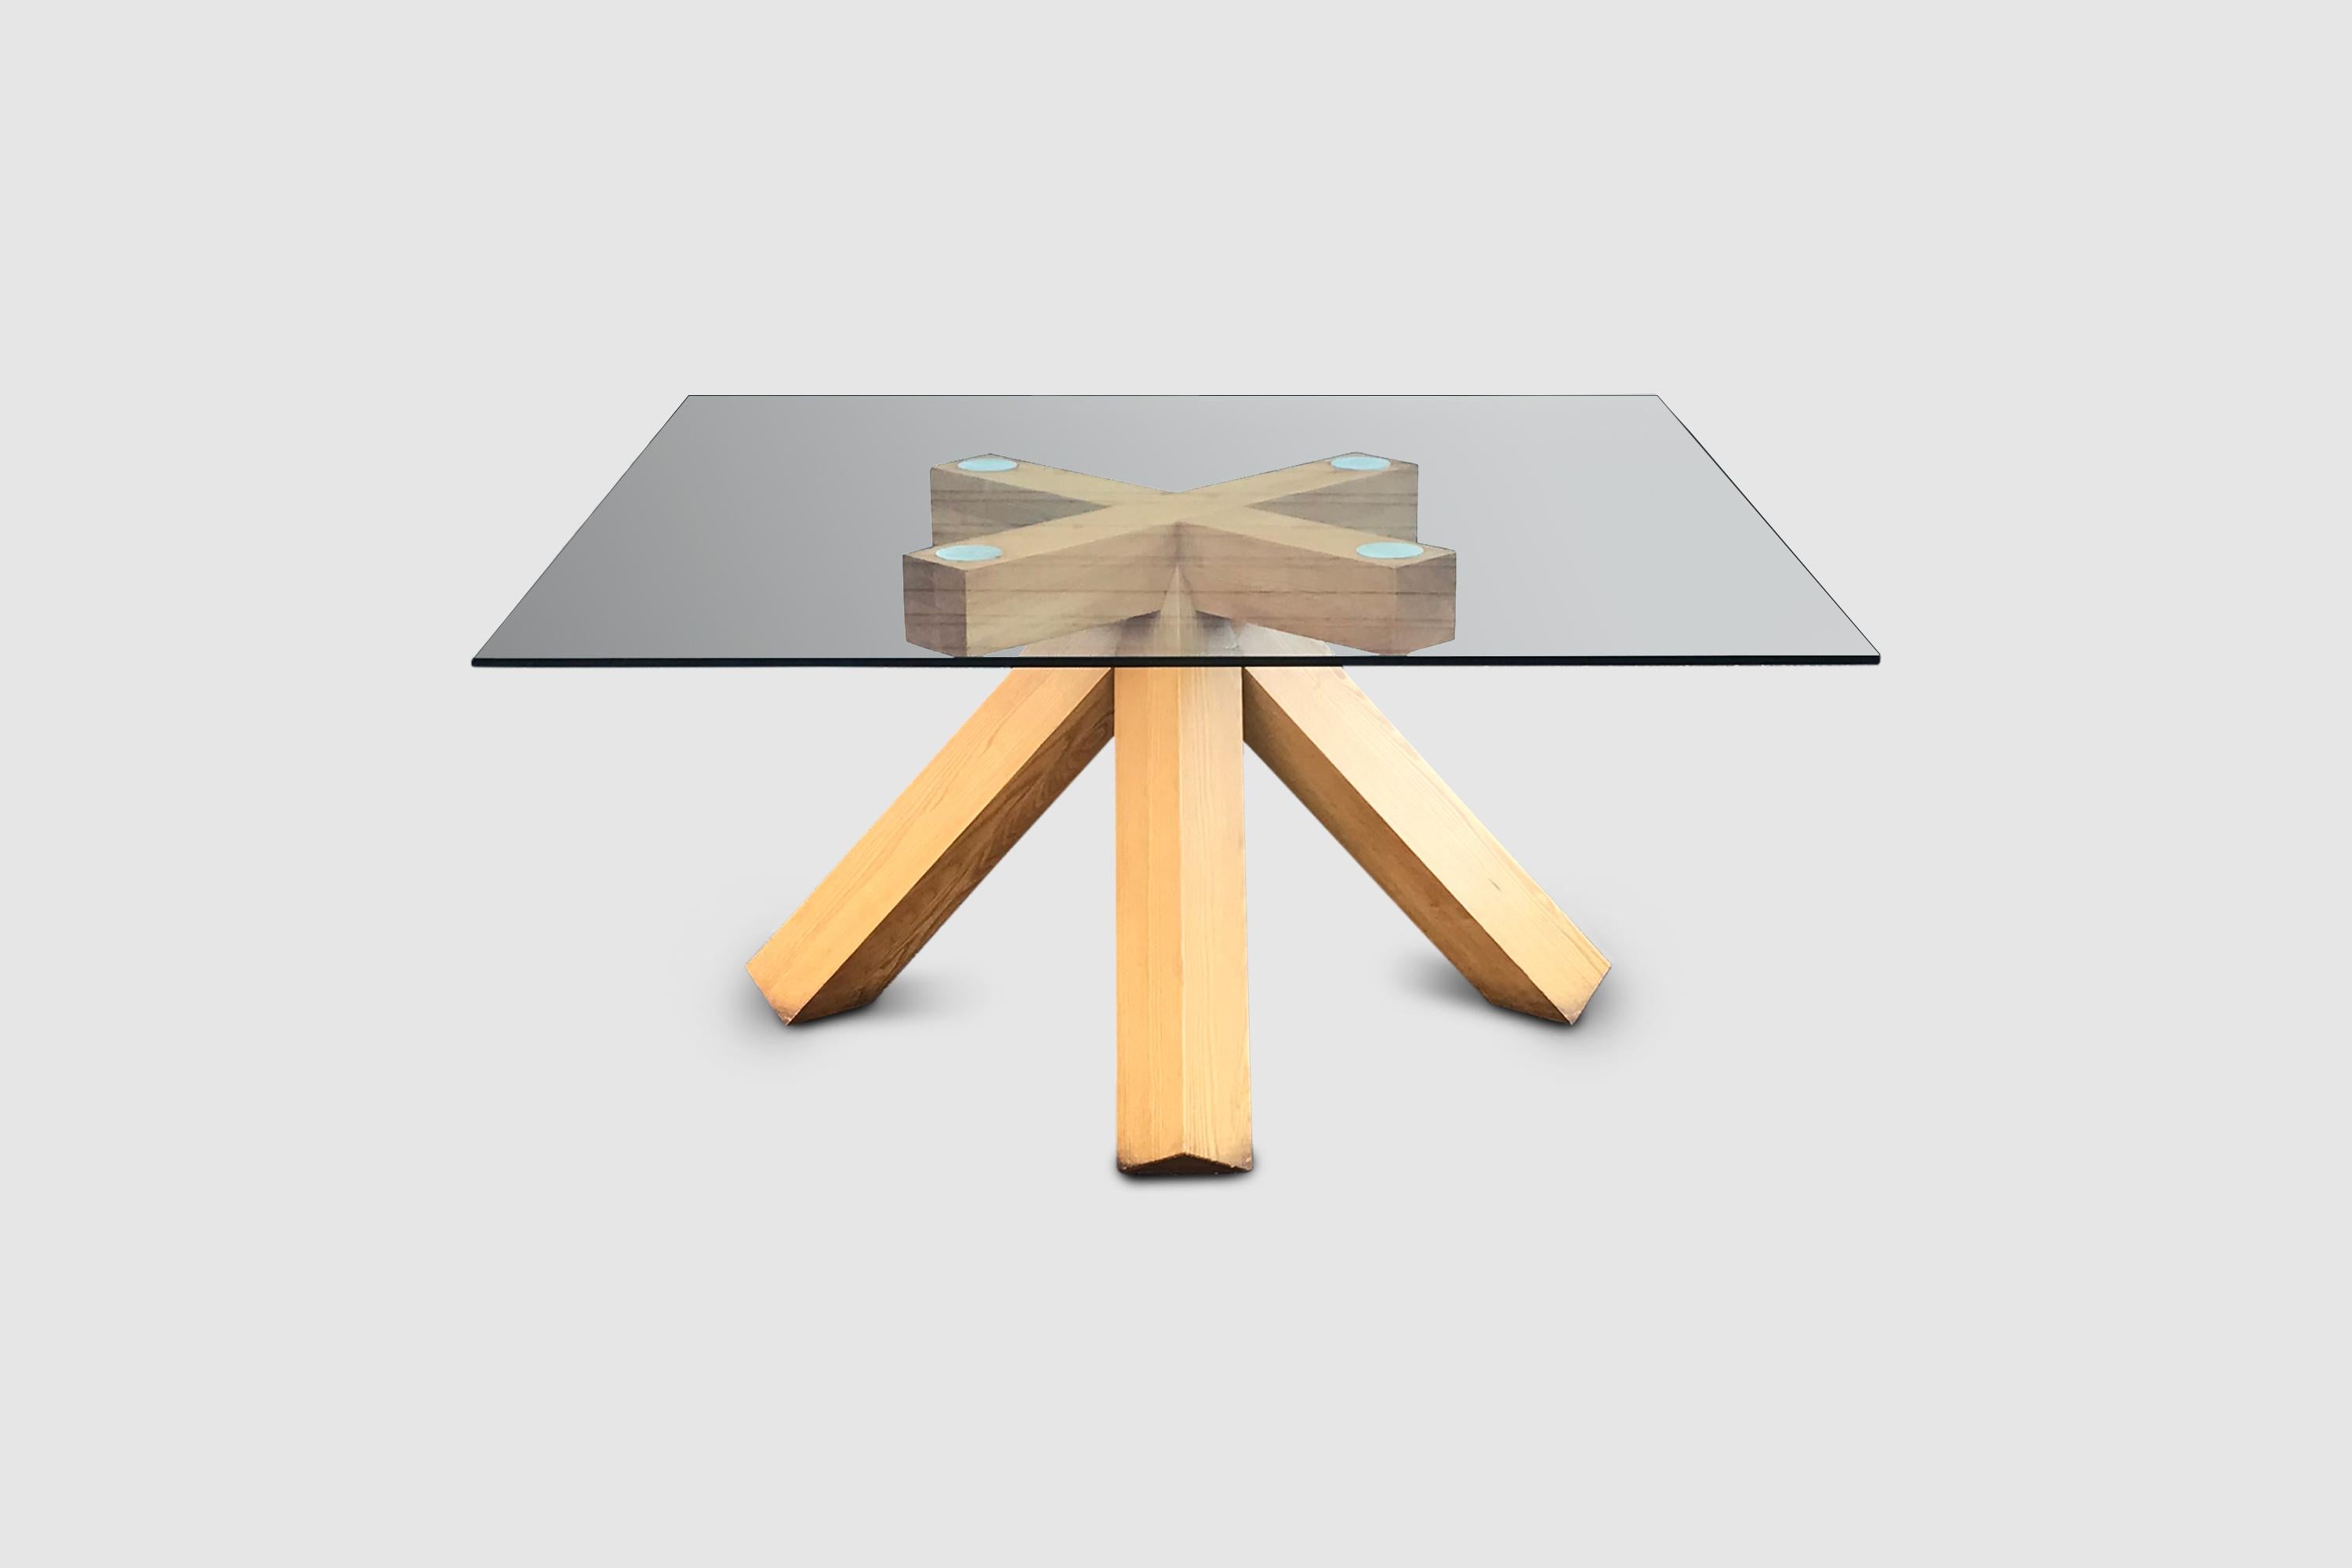 An extremely rare design by Mario Bellini for Cassina. The La Corte dining table was only produced in very limited numbers. After the famous exhibition ‘Italy: The New Domestic Landscape’ Bellini embarked on a journey to go back to the absolute